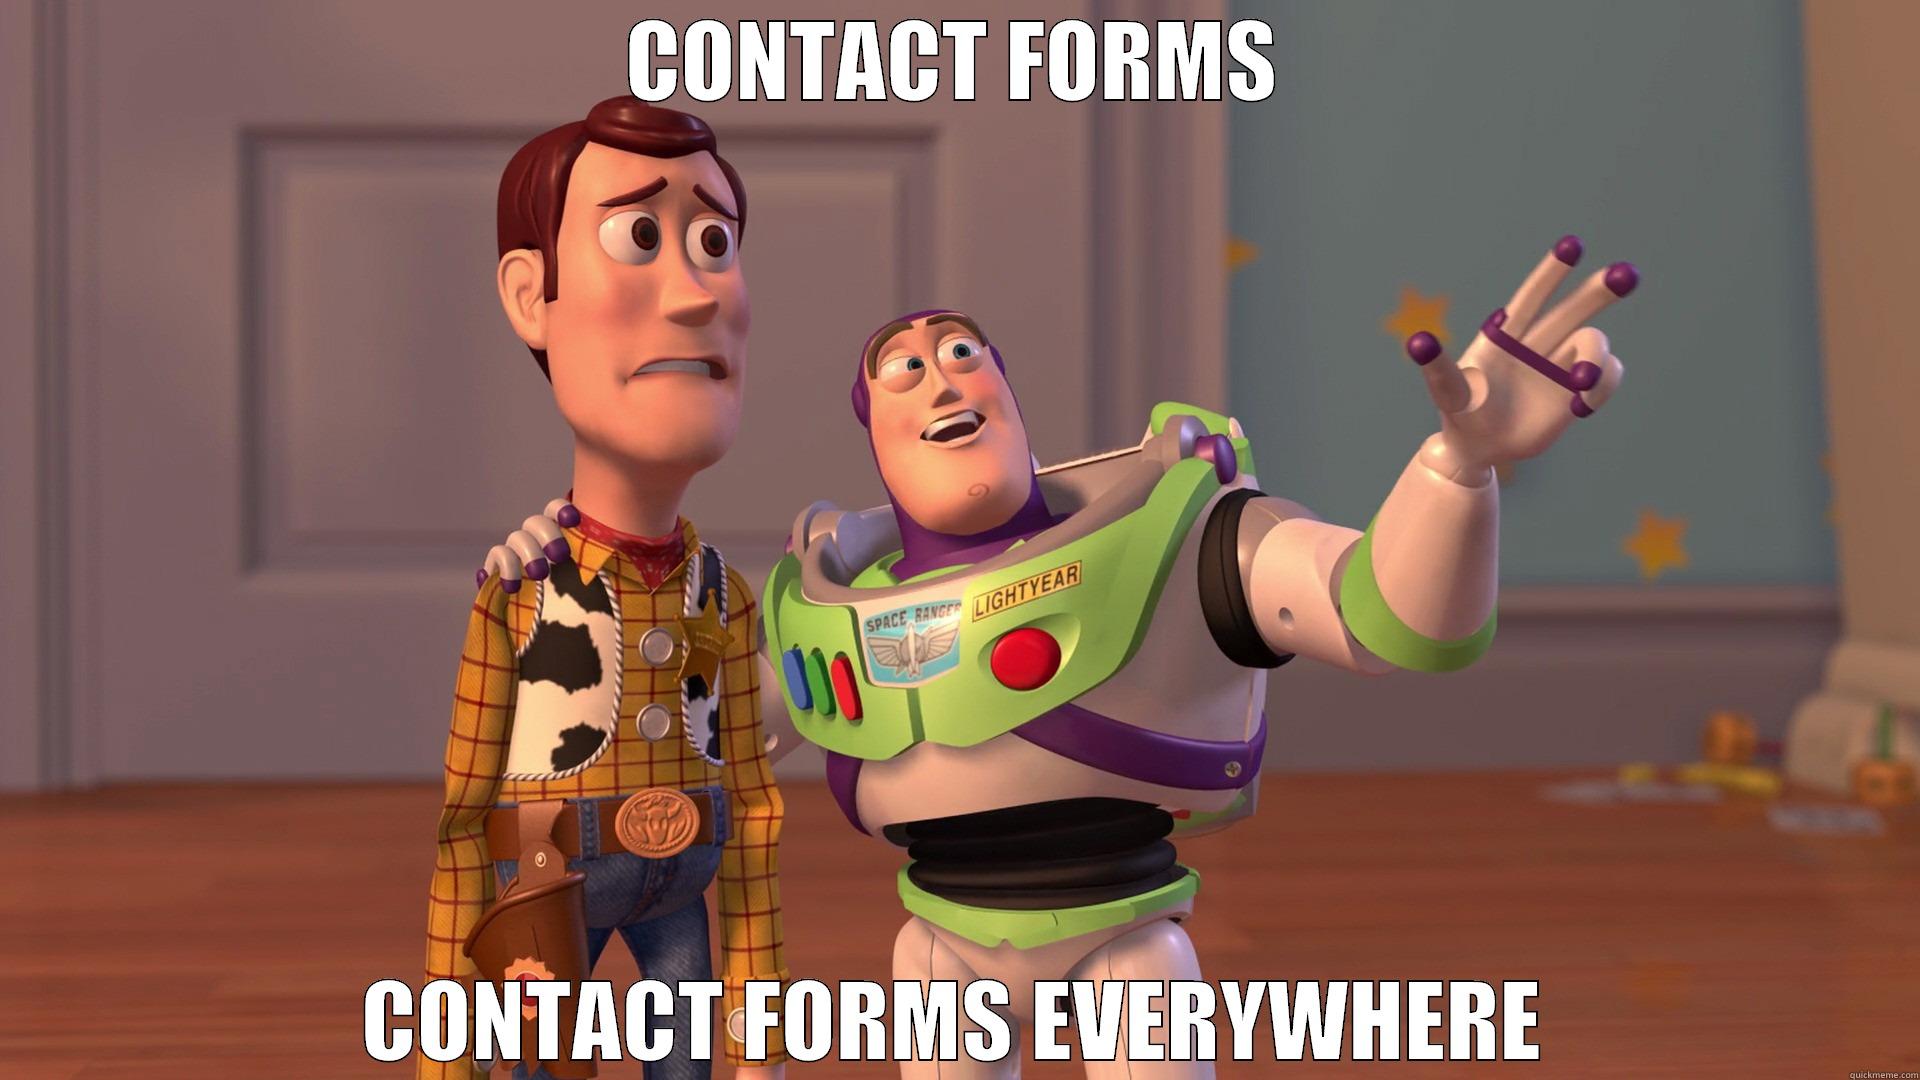 CONTACT FORMS CONTACT FORMS EVERYWHERE Misc